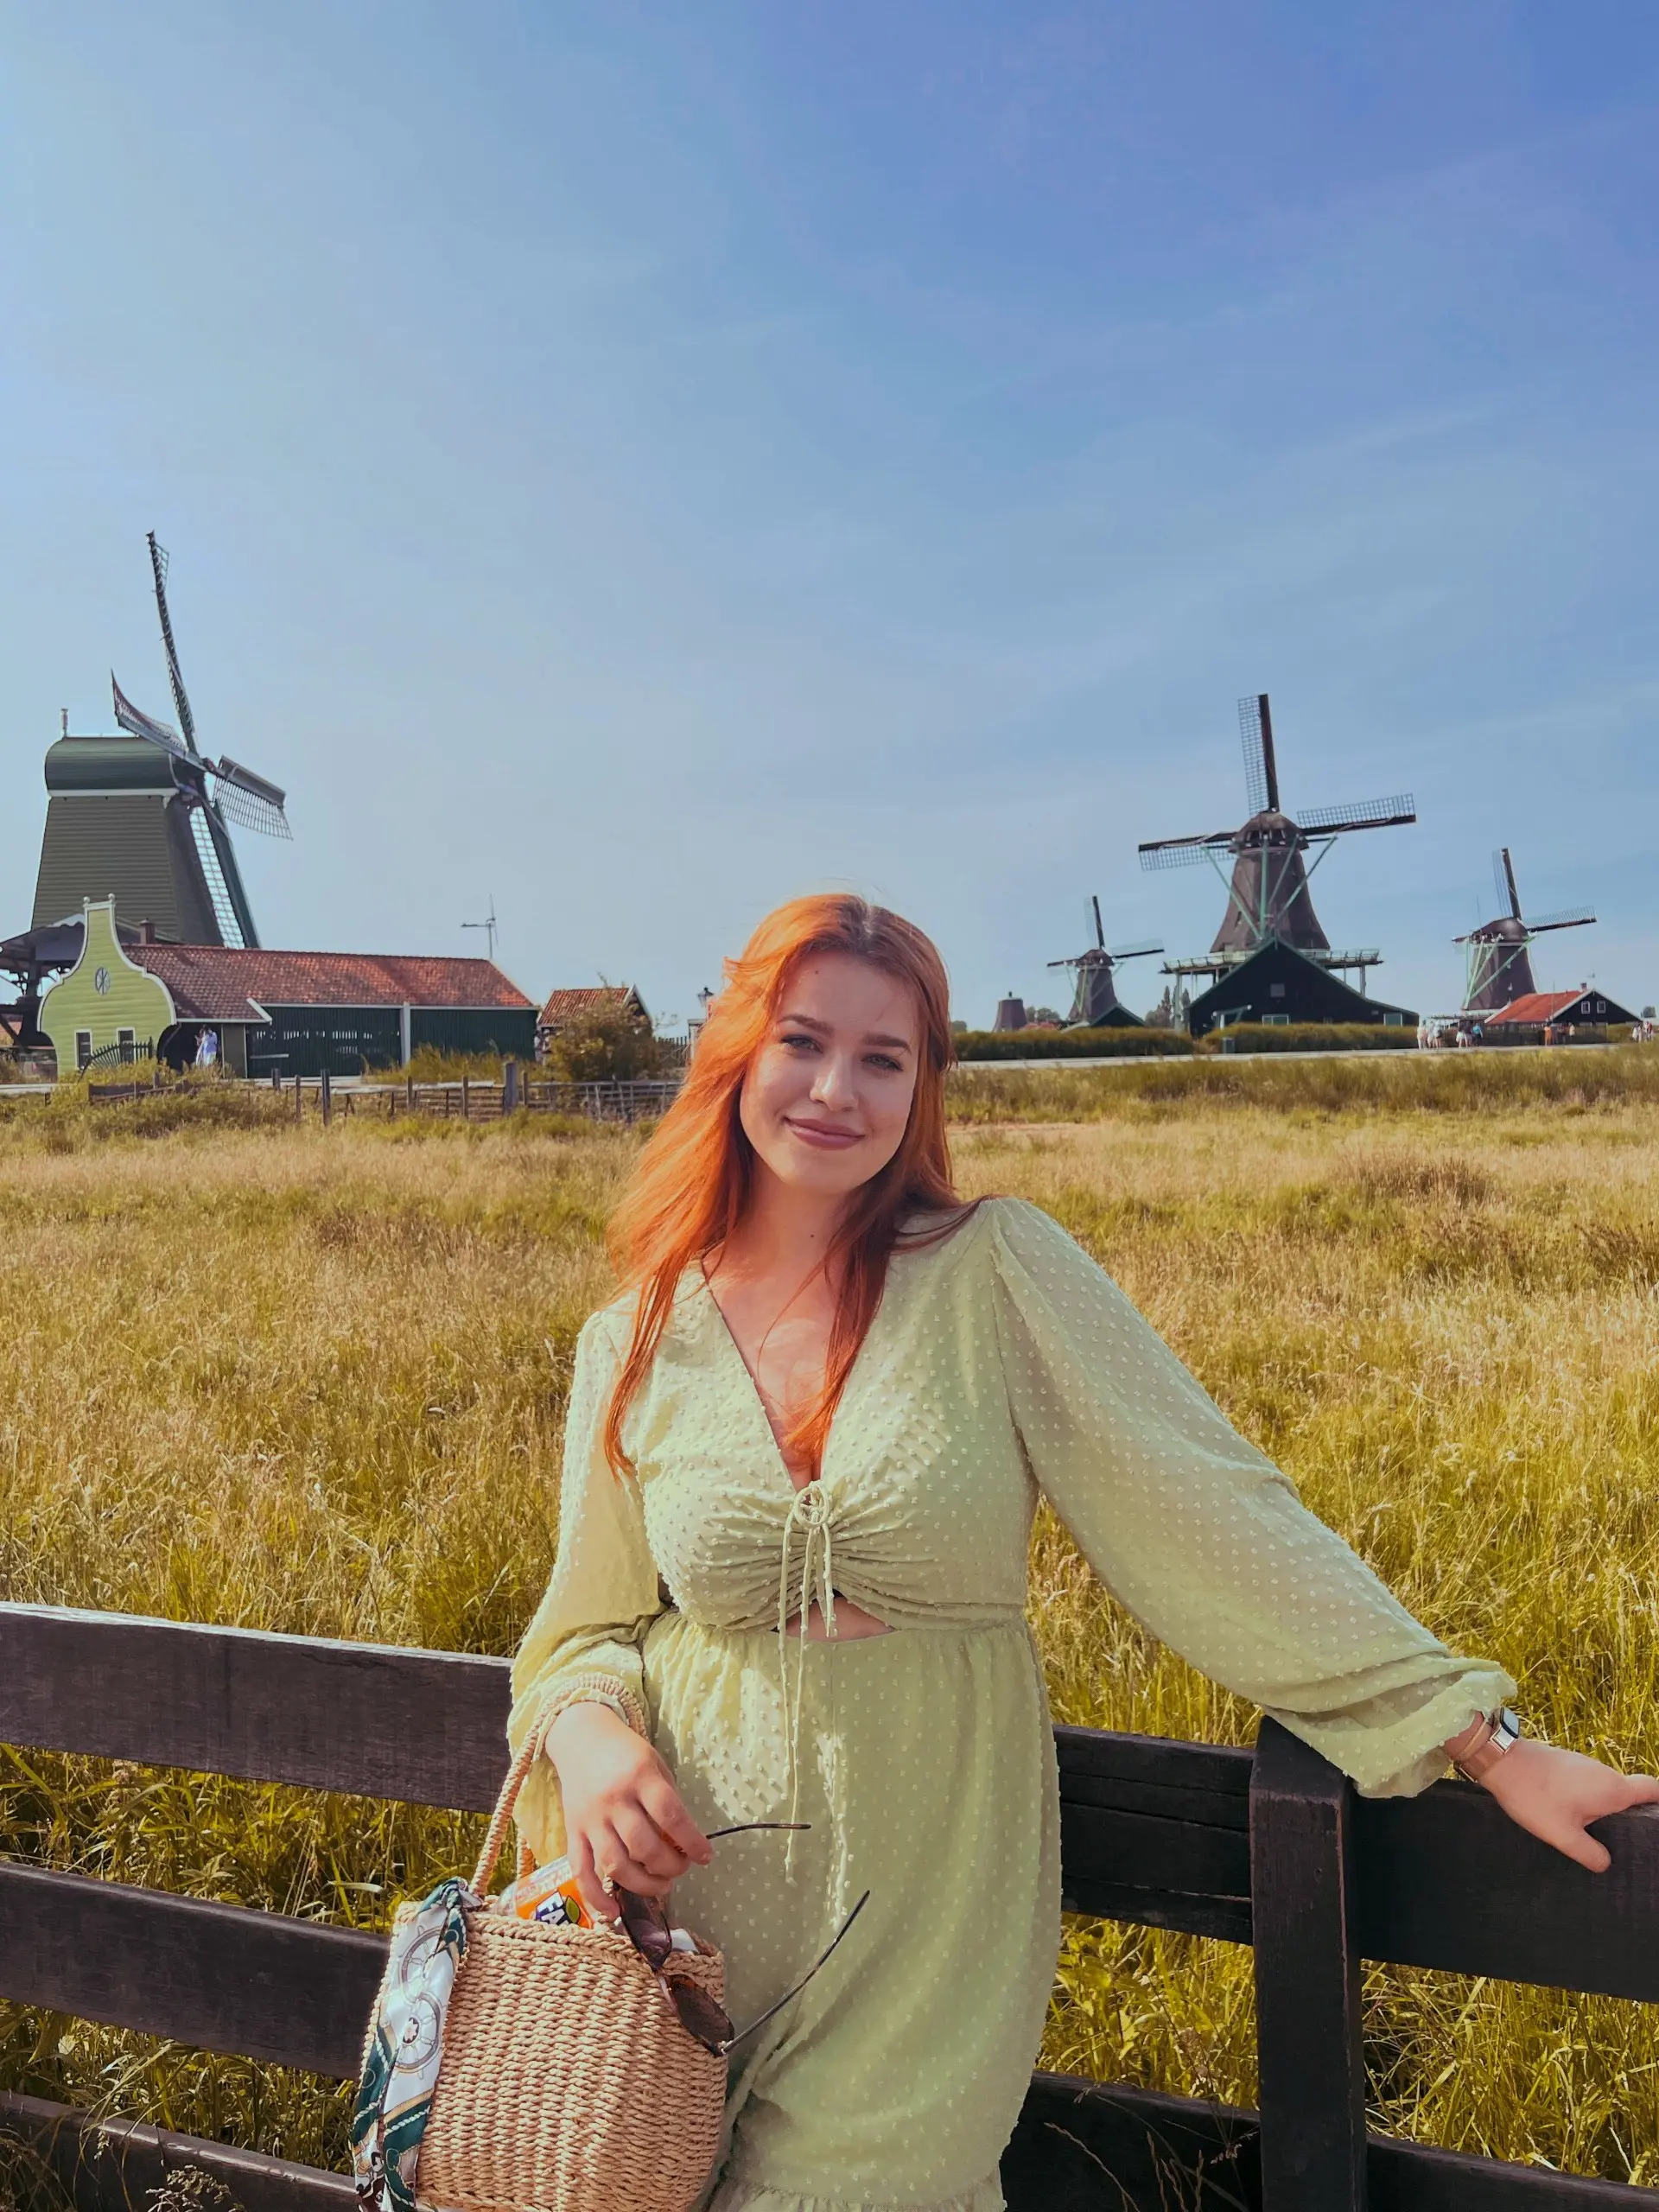 Alina poses in front of Dutch windmills